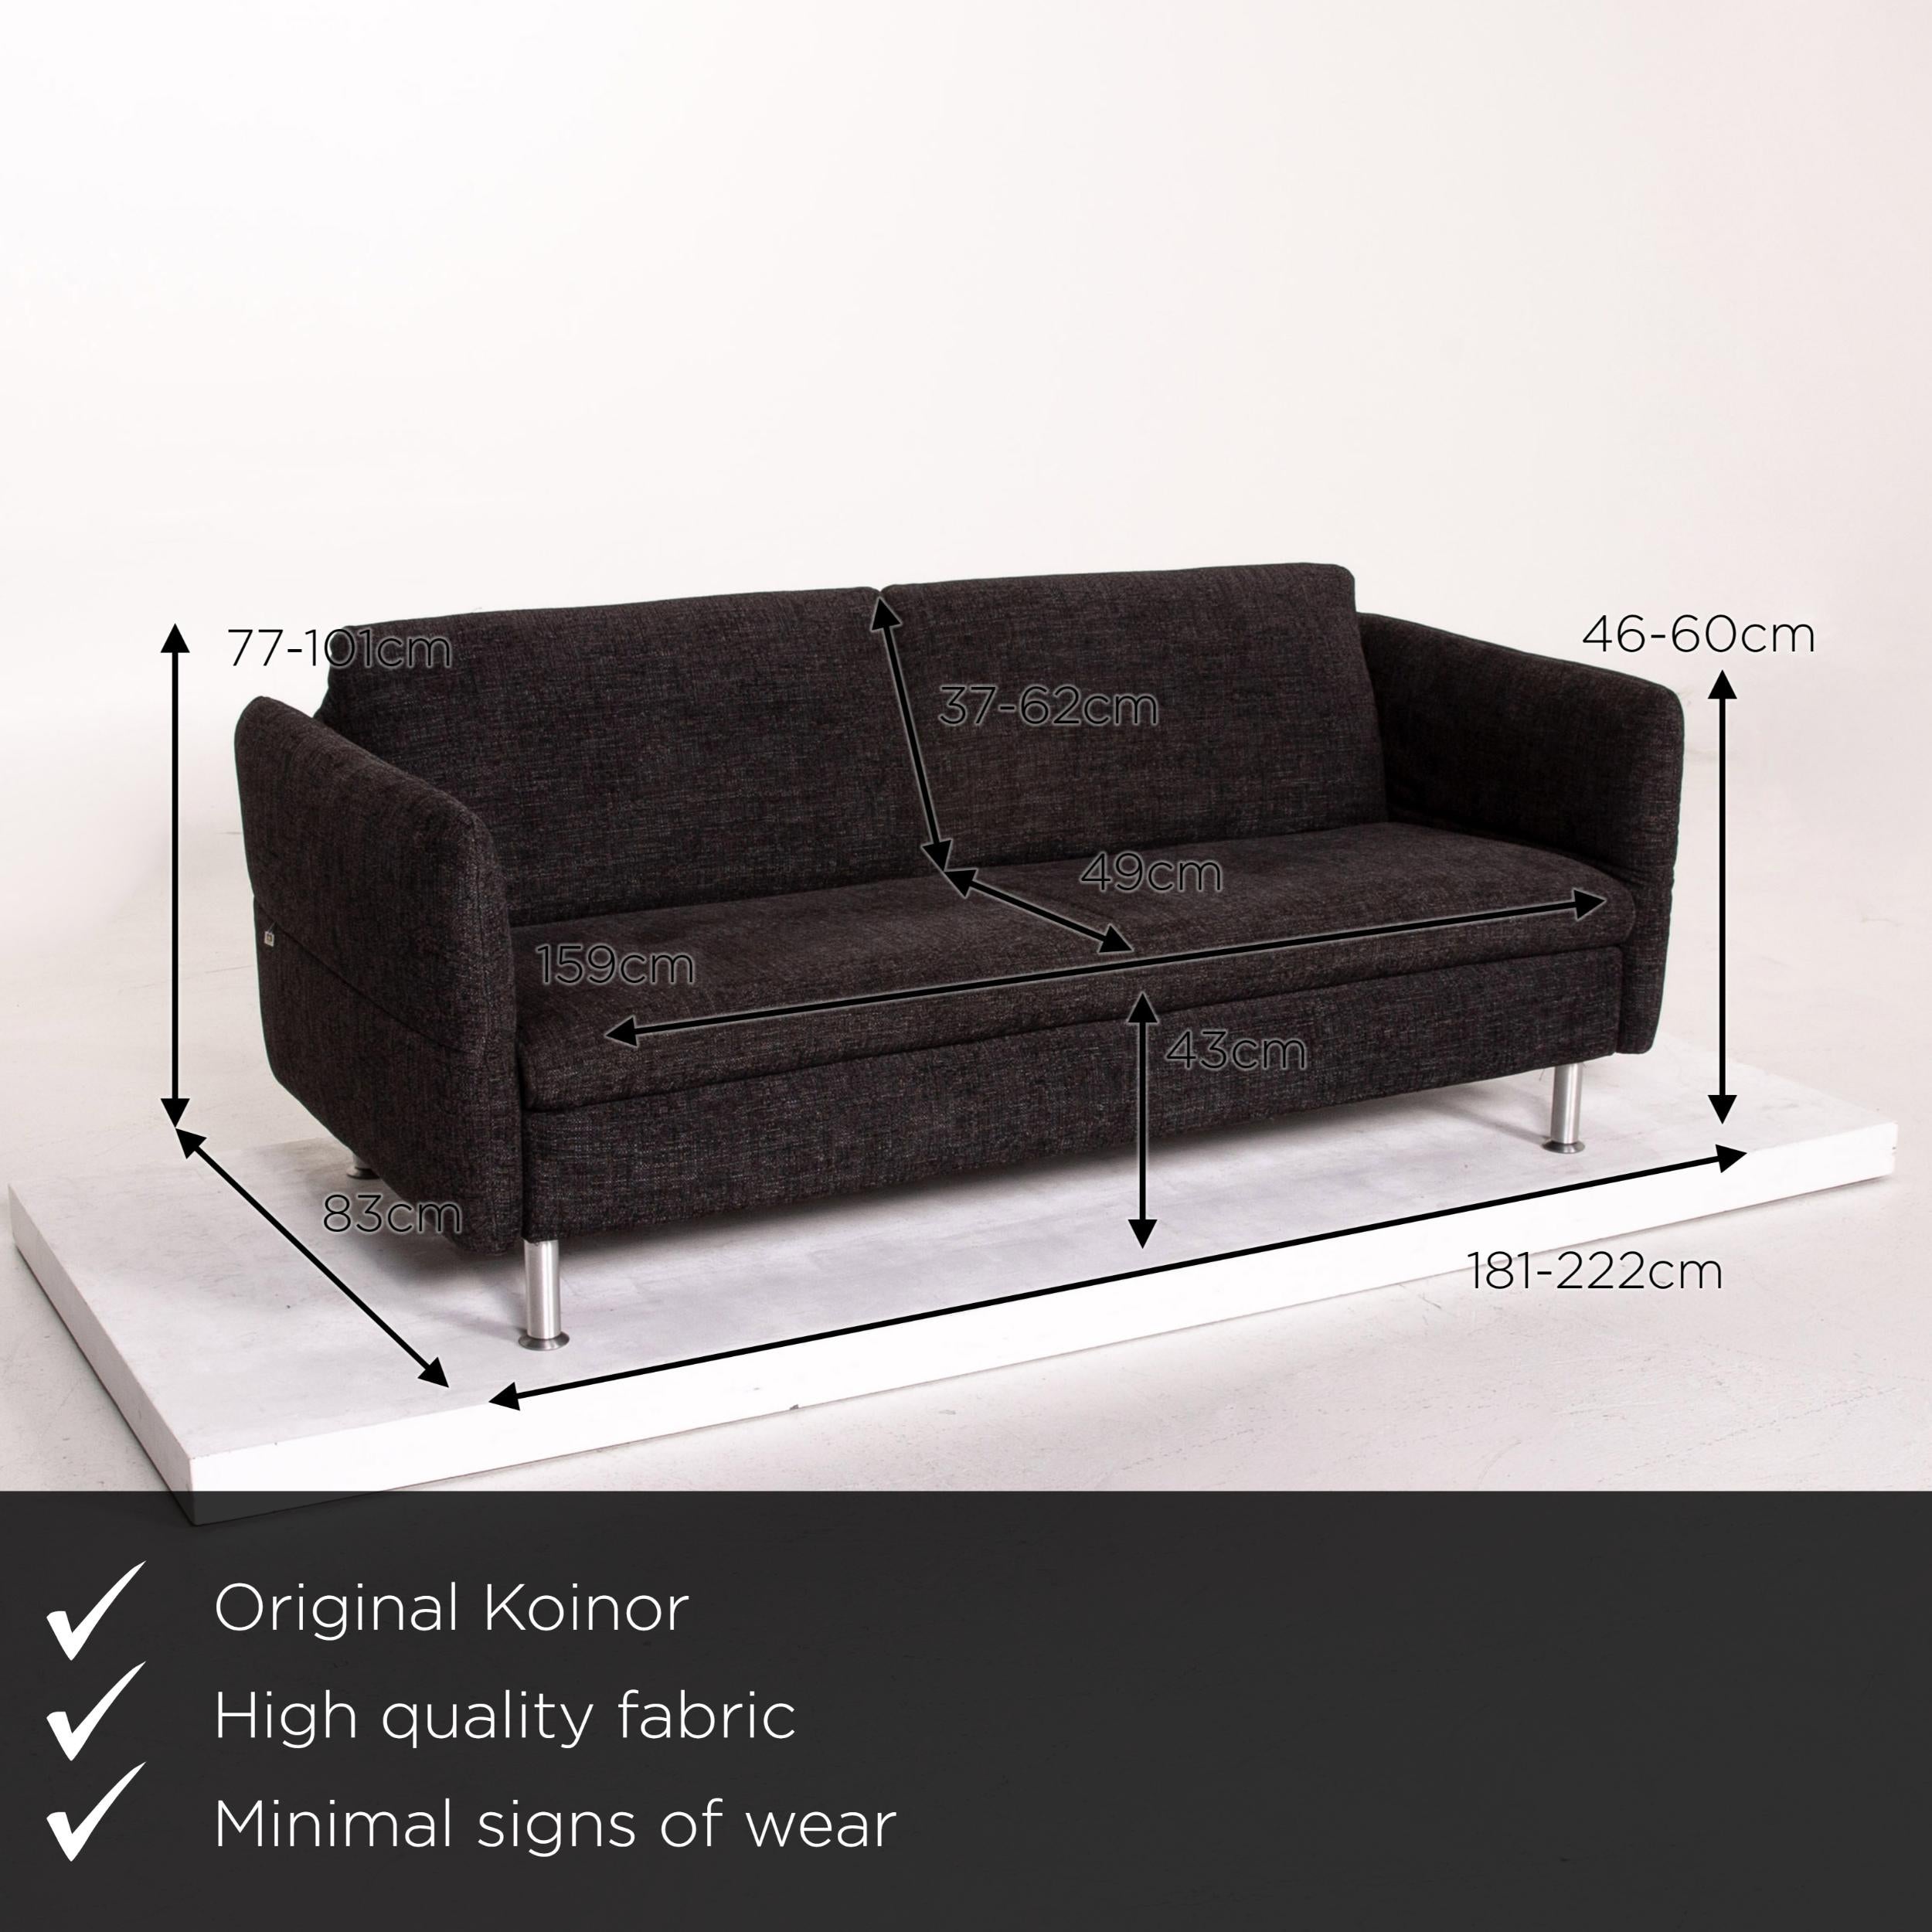 We present to you a Koinor Vittoria fabric sofa anthracite gray three-seat function couch.

Product Measurements in centimeters:

Depth 83
Width 181
Height 77
Seat height 43
Rest height 46
Seat depth 49
Seat width 159
Back height